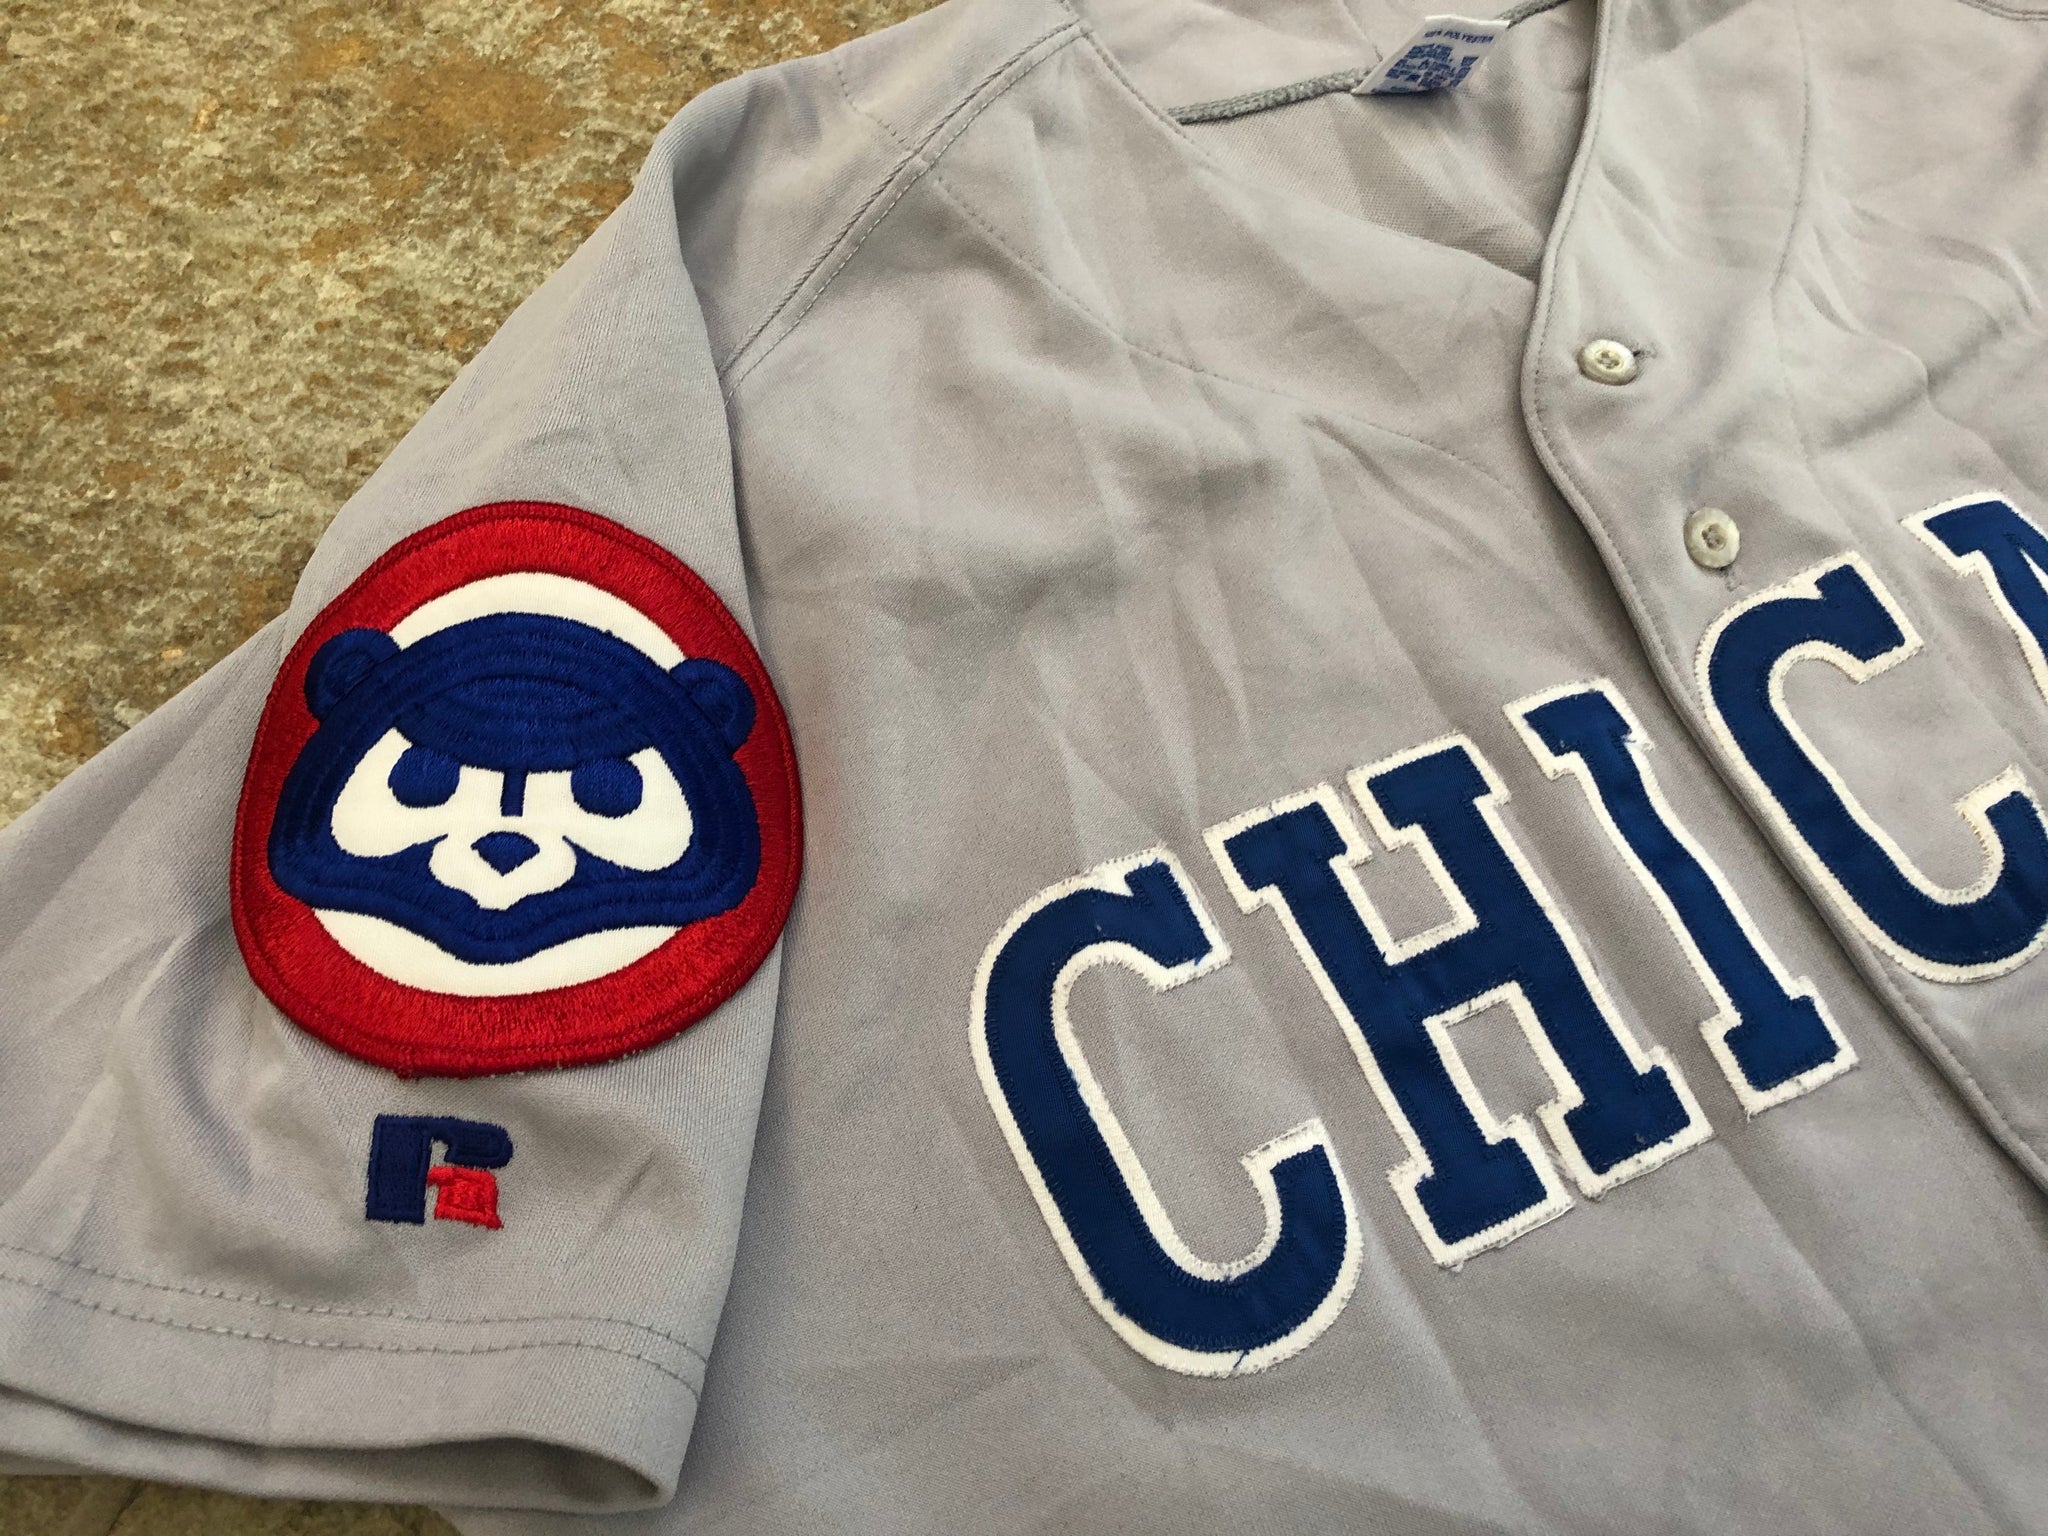 Russell Athletic, Shirts, Vintage Russell Athletics Chicago Cubs Jersey